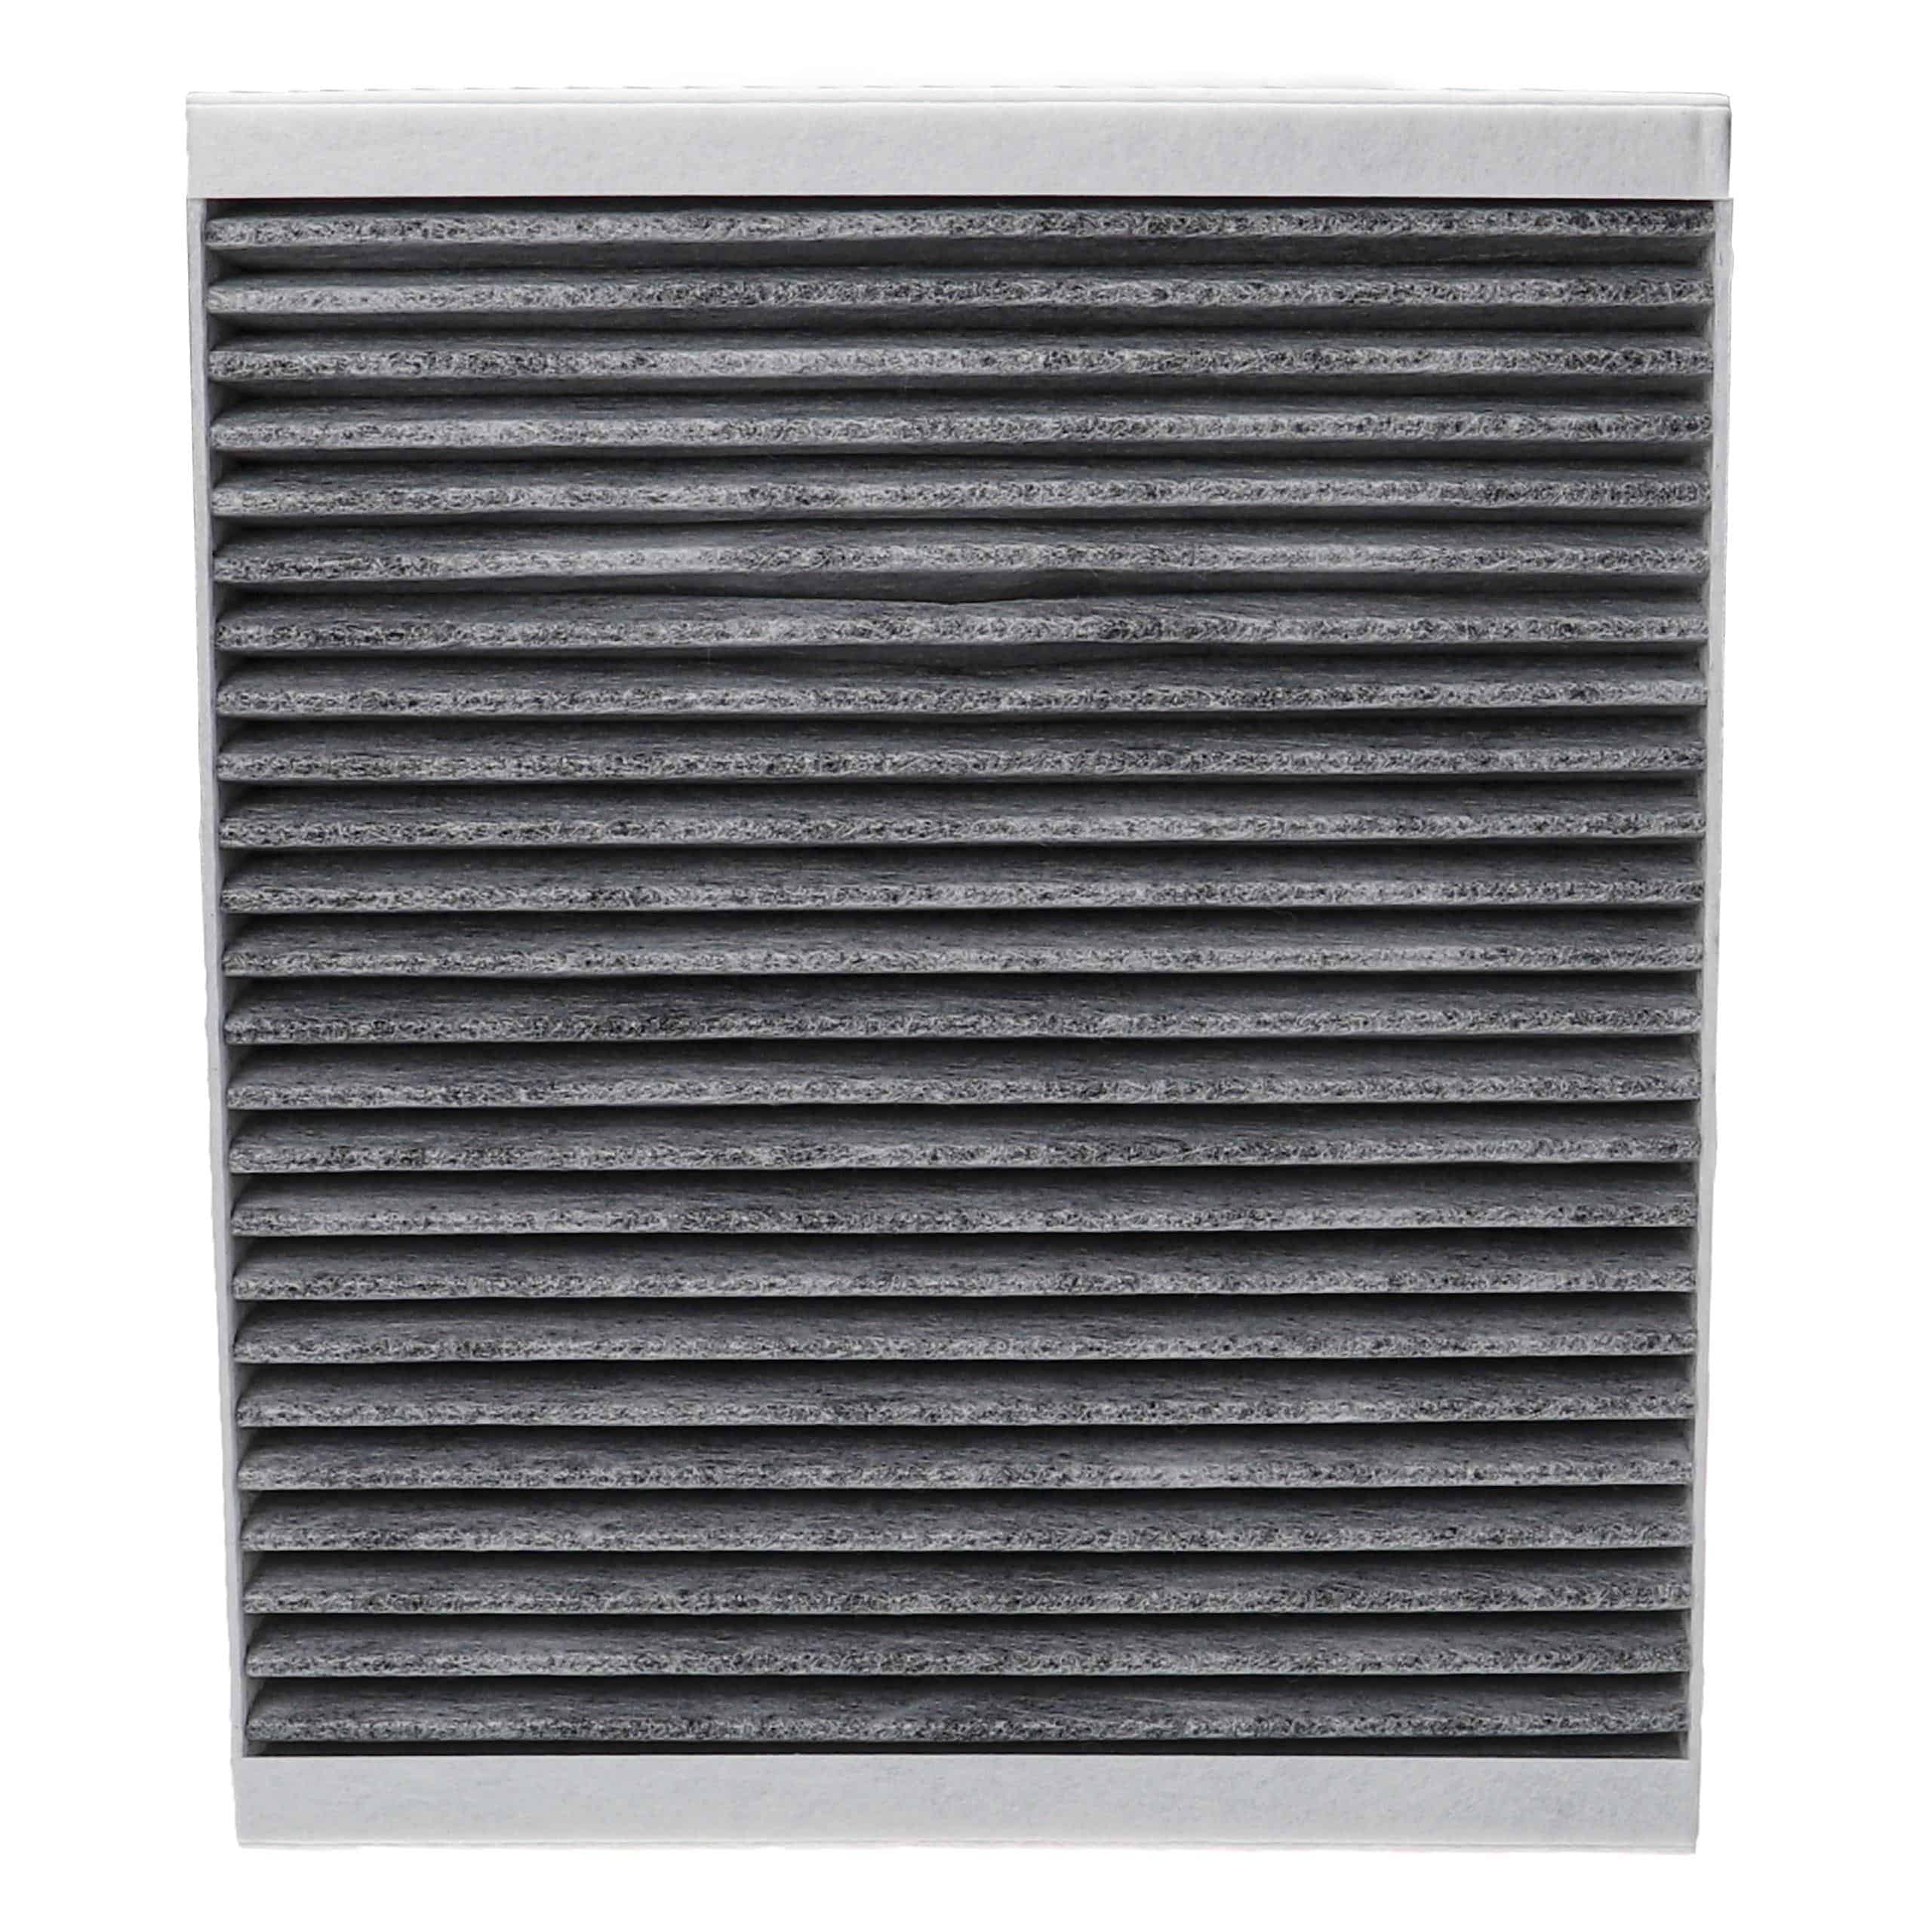 Cabin Air Filter replaces 1A First Automotive C30428 etc.